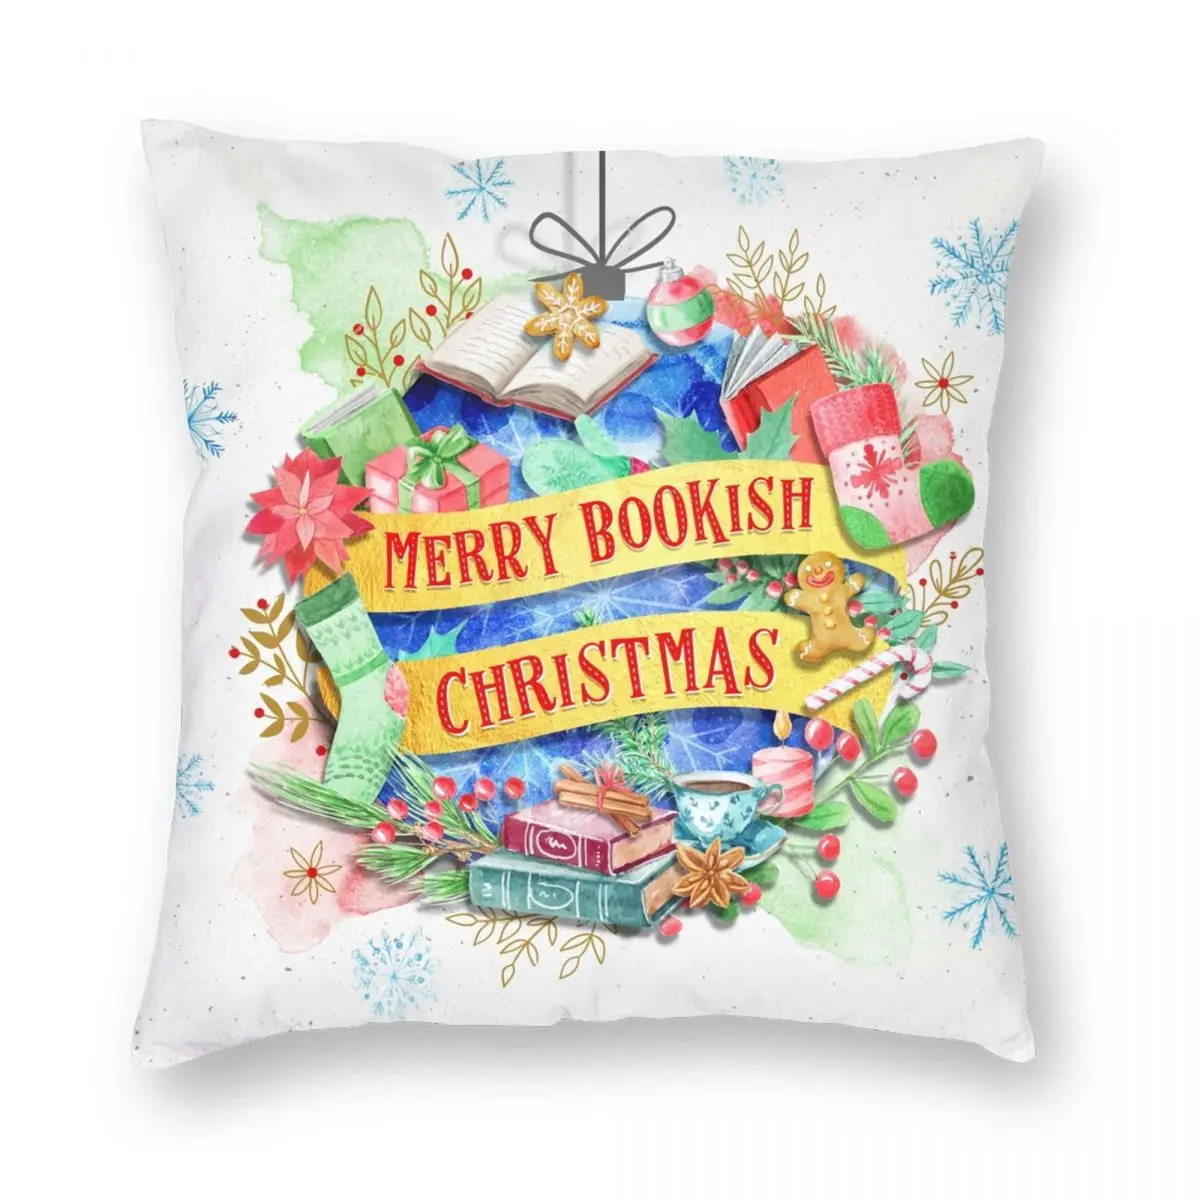 Merry Bookish Christmas Pillowcase Printing Polyester Cushion Cover Gift Watercolor Floral Pillow Case Cover Home Zipper 45X45cm